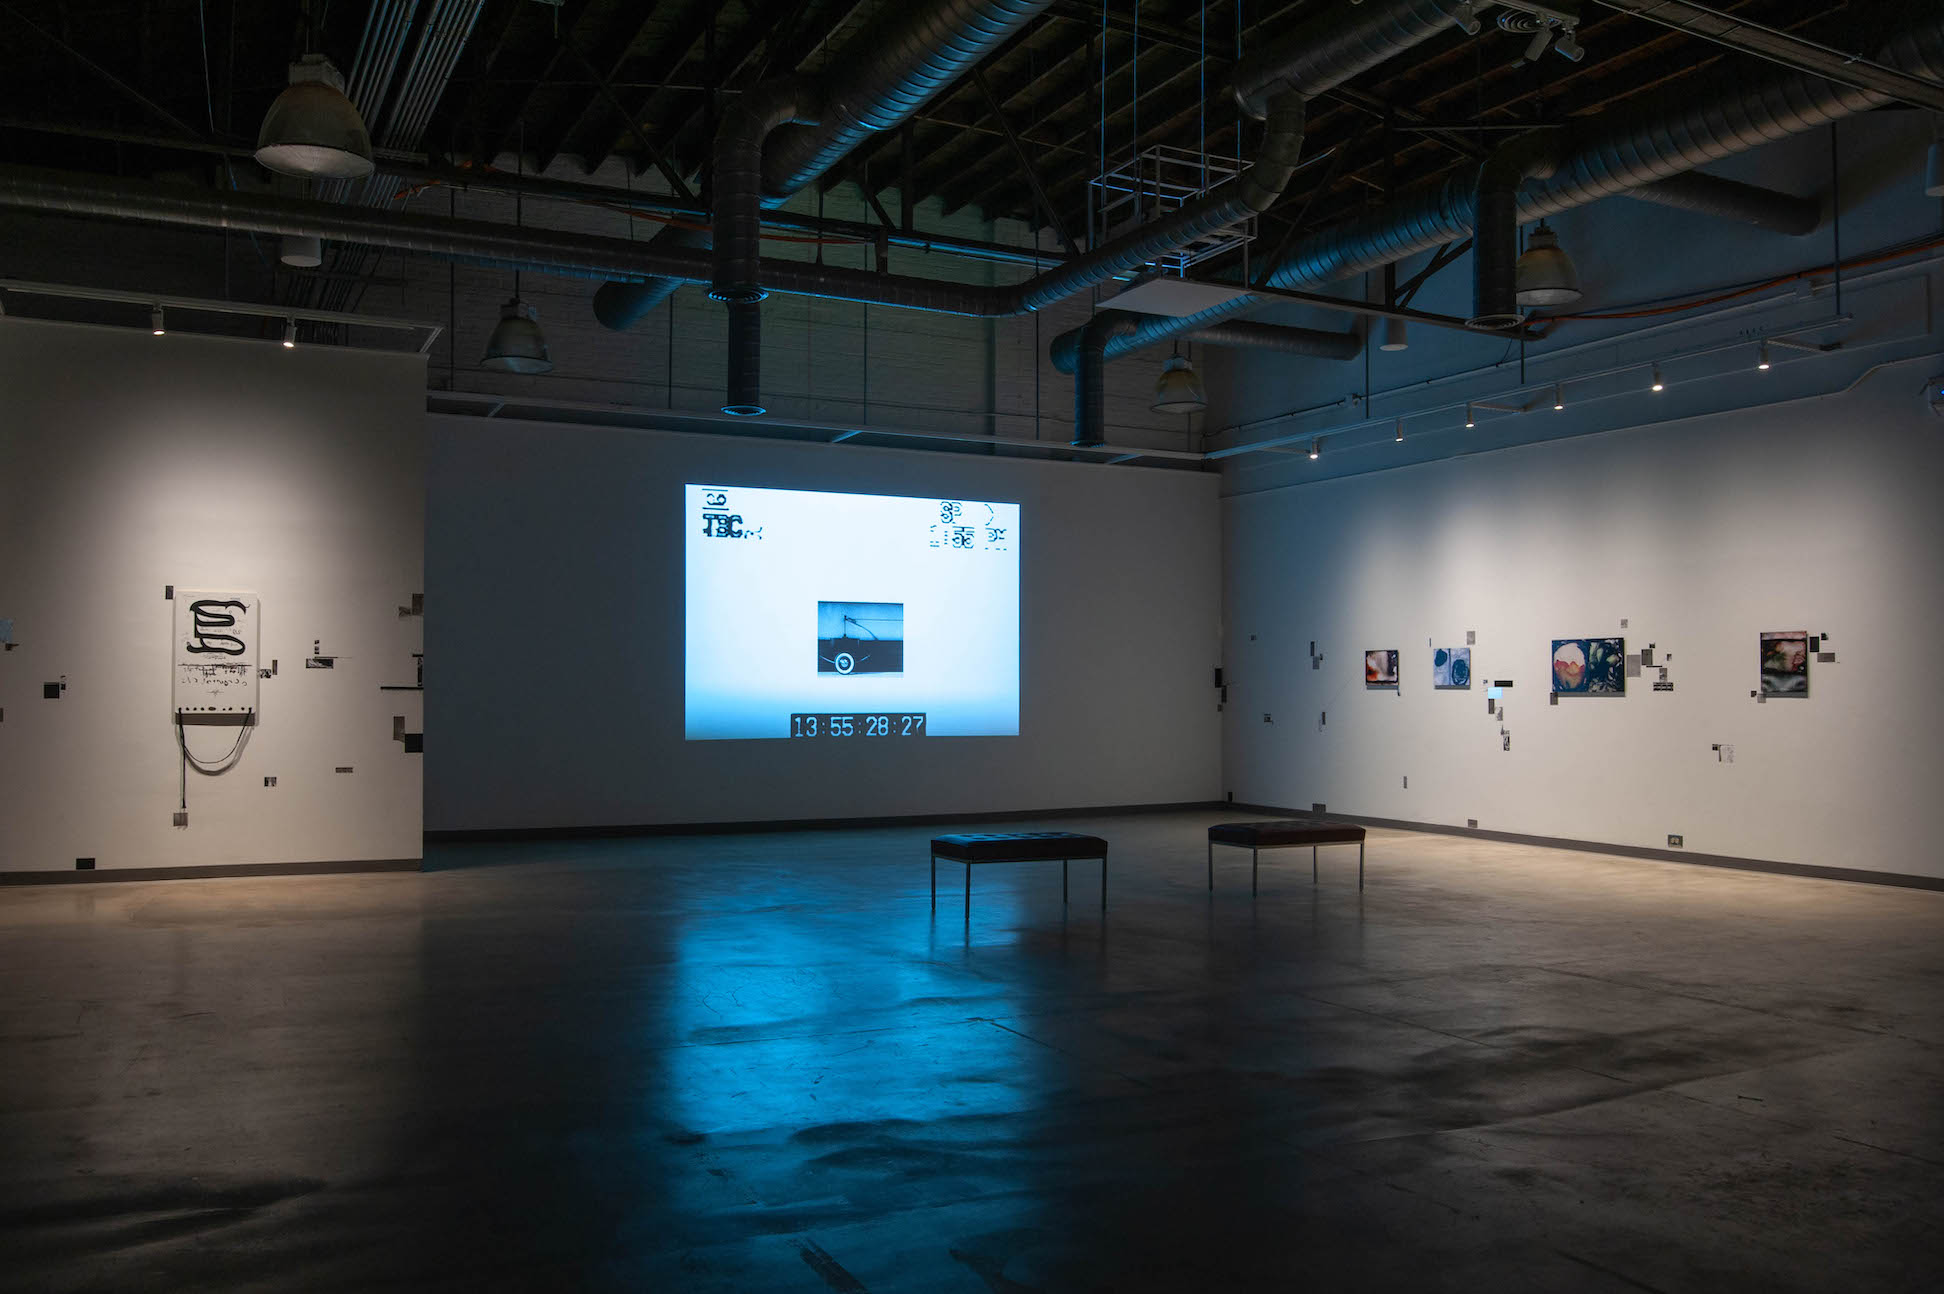 A view of the exhibition space, with two leather benches in front of a big screen projector. On both sides of the projector on the other walls, there are different artworks and text.